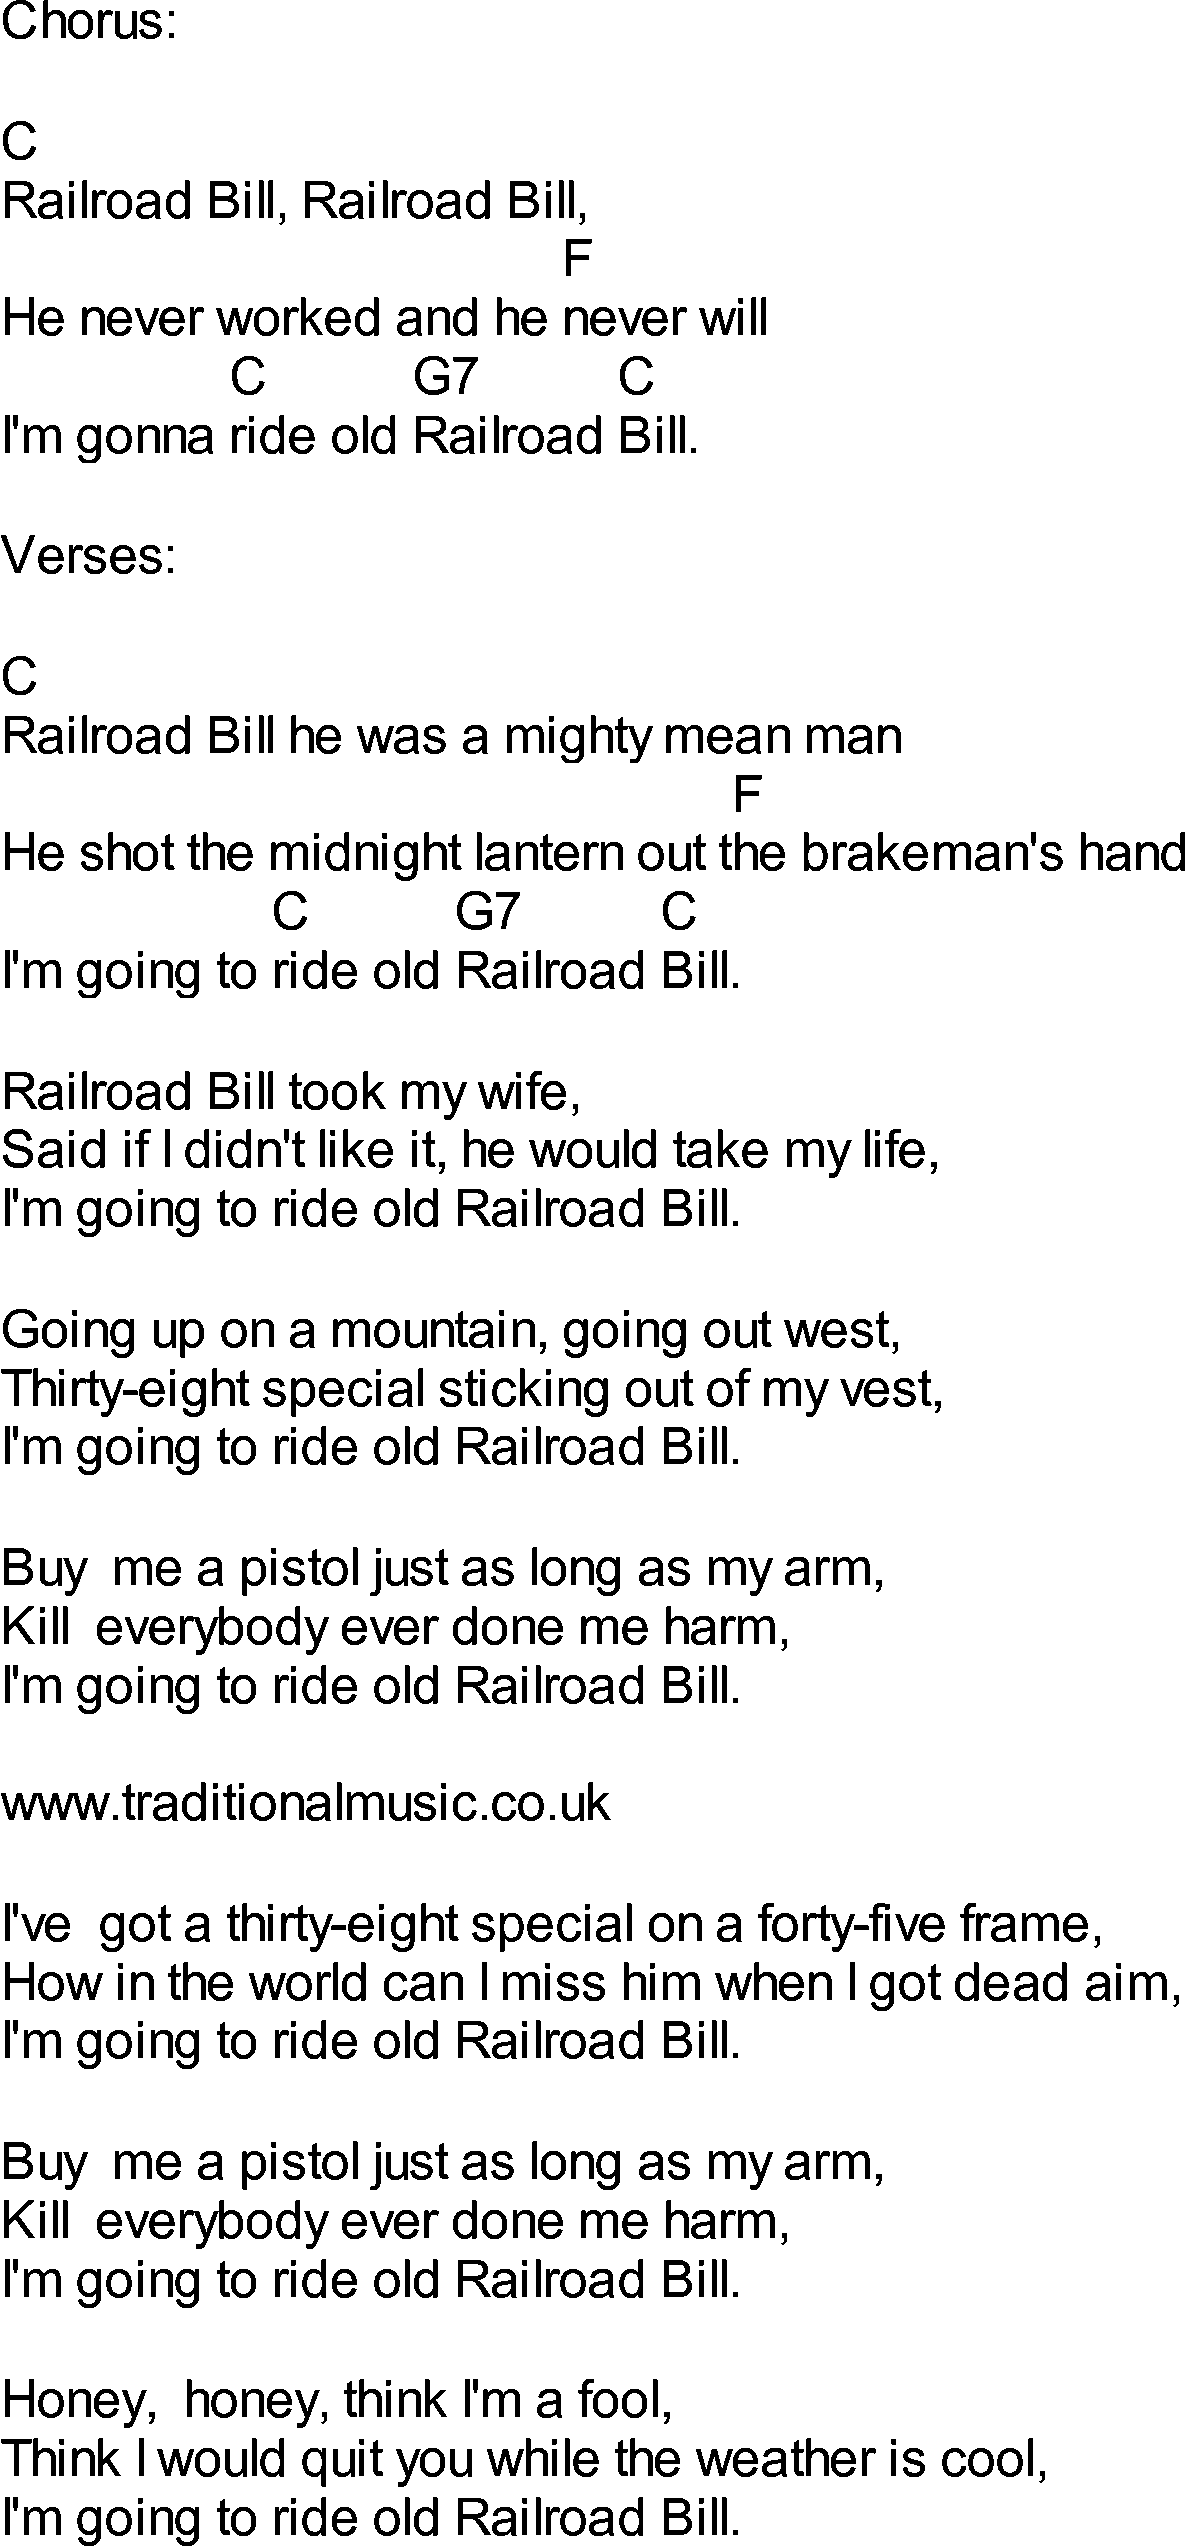 Bluegrass songs with chords - Railroad Bill